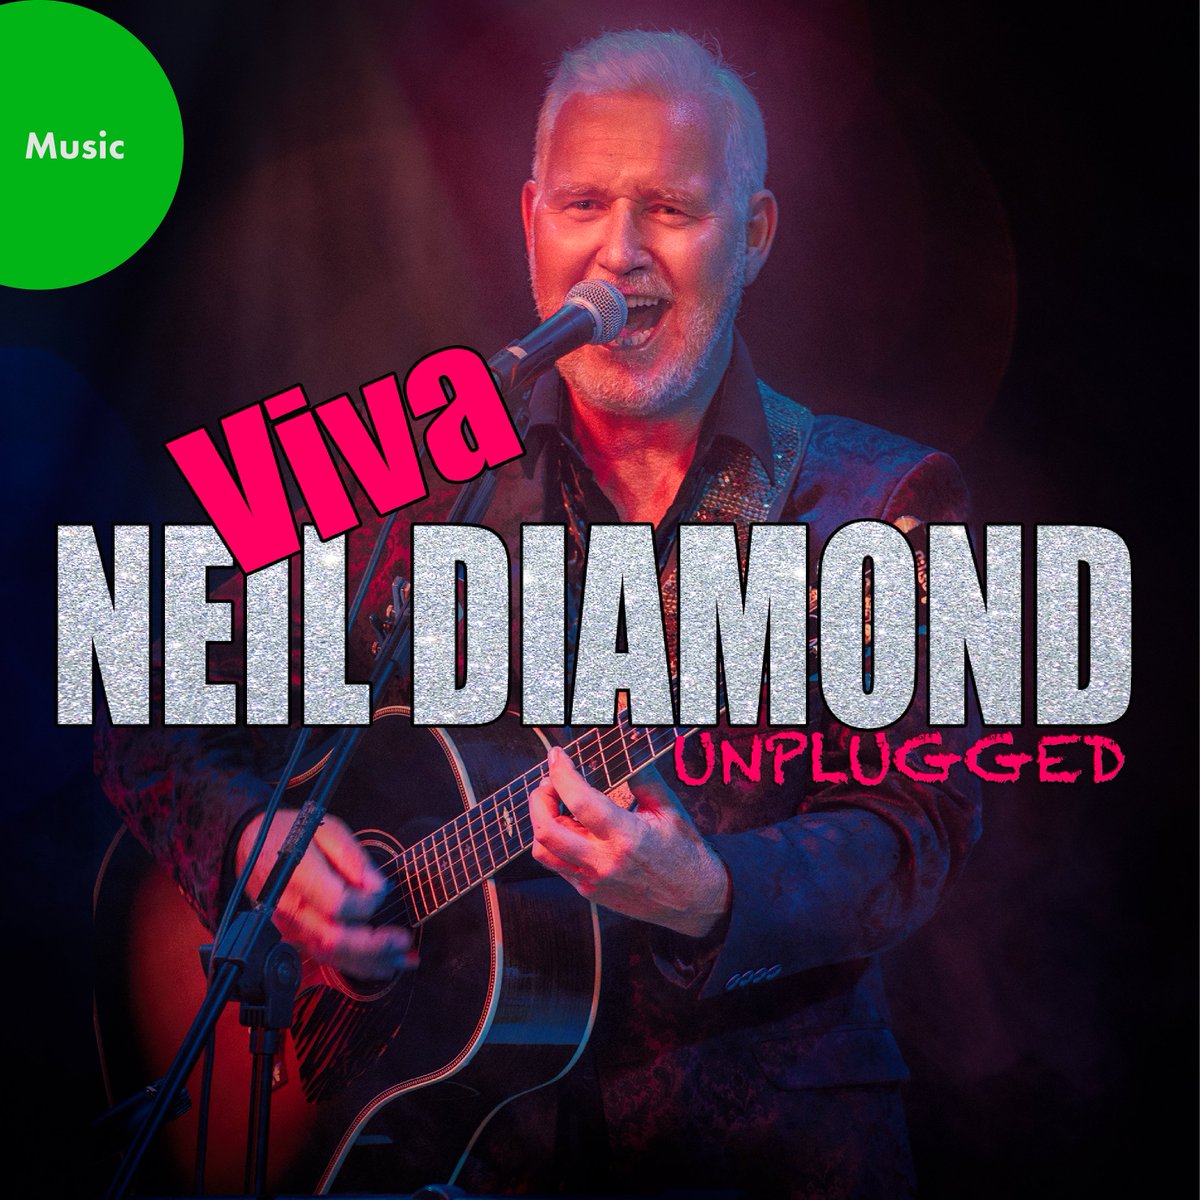 Get ready to sing along to Neil Diamond with Bob Drury's show stopping tribute💎 📅 Saturday 7th October 2023, 7:30 PM 🎟 Tickets £17.00 (General) Prepare to be blown away by his vocal likeness... Tickets: bit.ly/BDVNDU